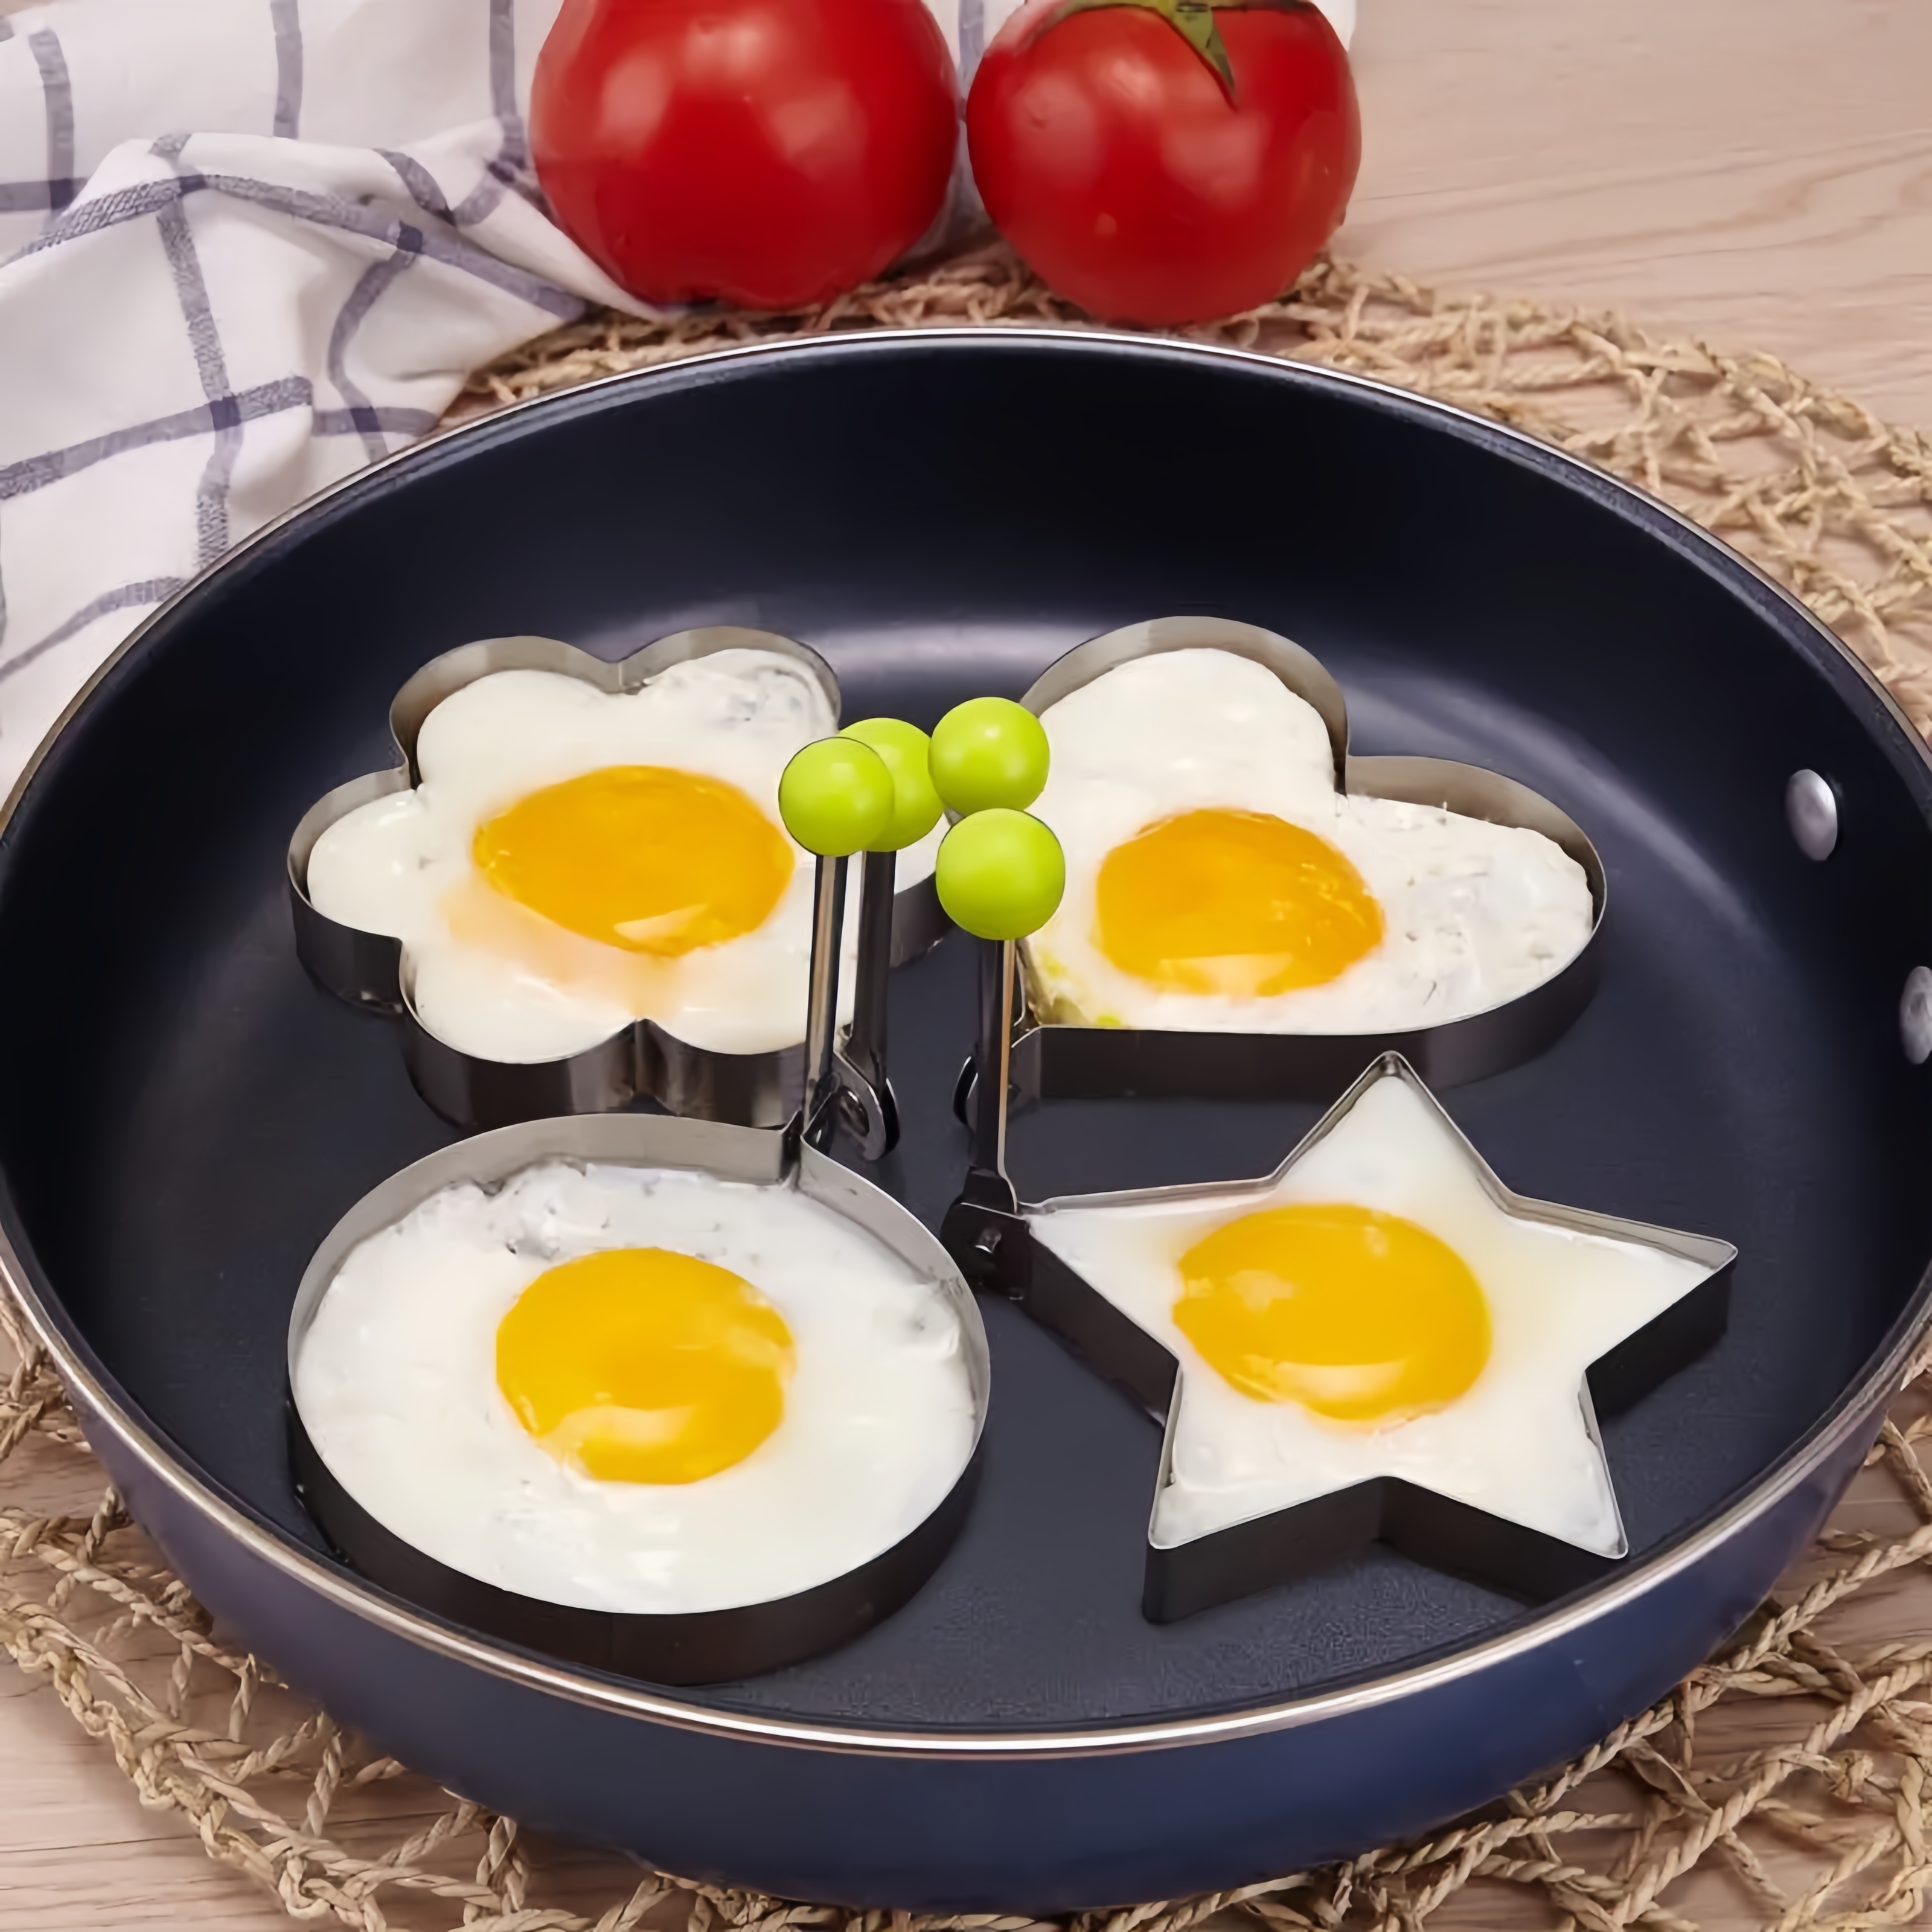 

4-piece Stainless Steel Egg Rings Set For Frying, Non-stick Egg Mold Pancake Maker With Heart And Star Shapes For Breakfast, Food Contact Safe Cookware For Home Kitchen Essentials